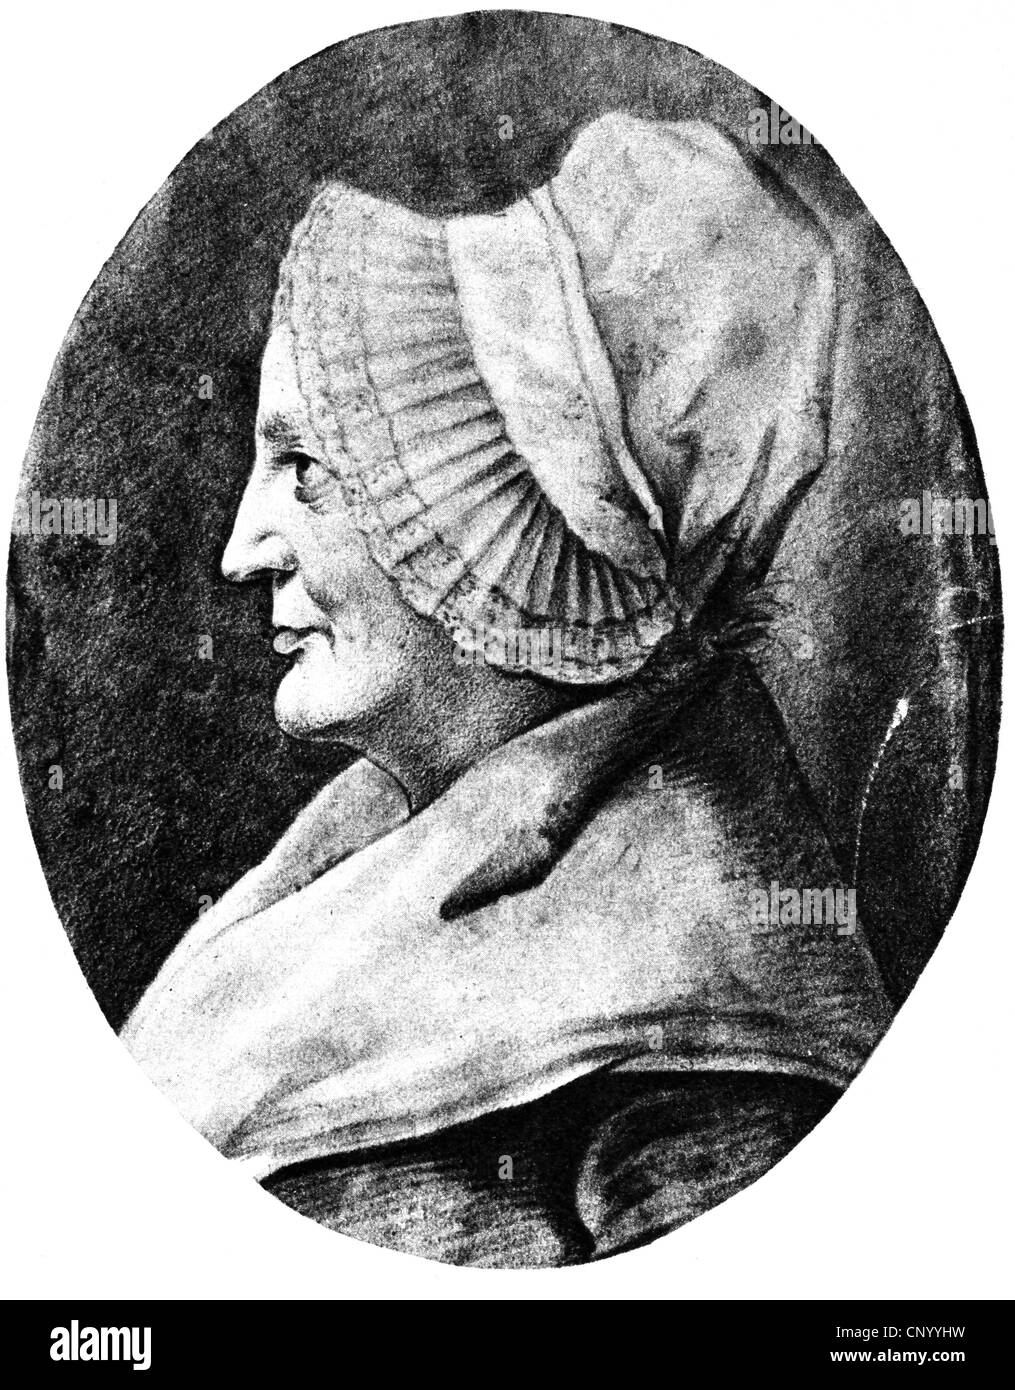 Fontane, Theodor, 30.12.1819 - 20.9.1898, German writer, portrait, his great-grandmother Marie Louise, at the age of 69 years, profile, drawing, by Pierre Fontane, 1801, Stock Photo